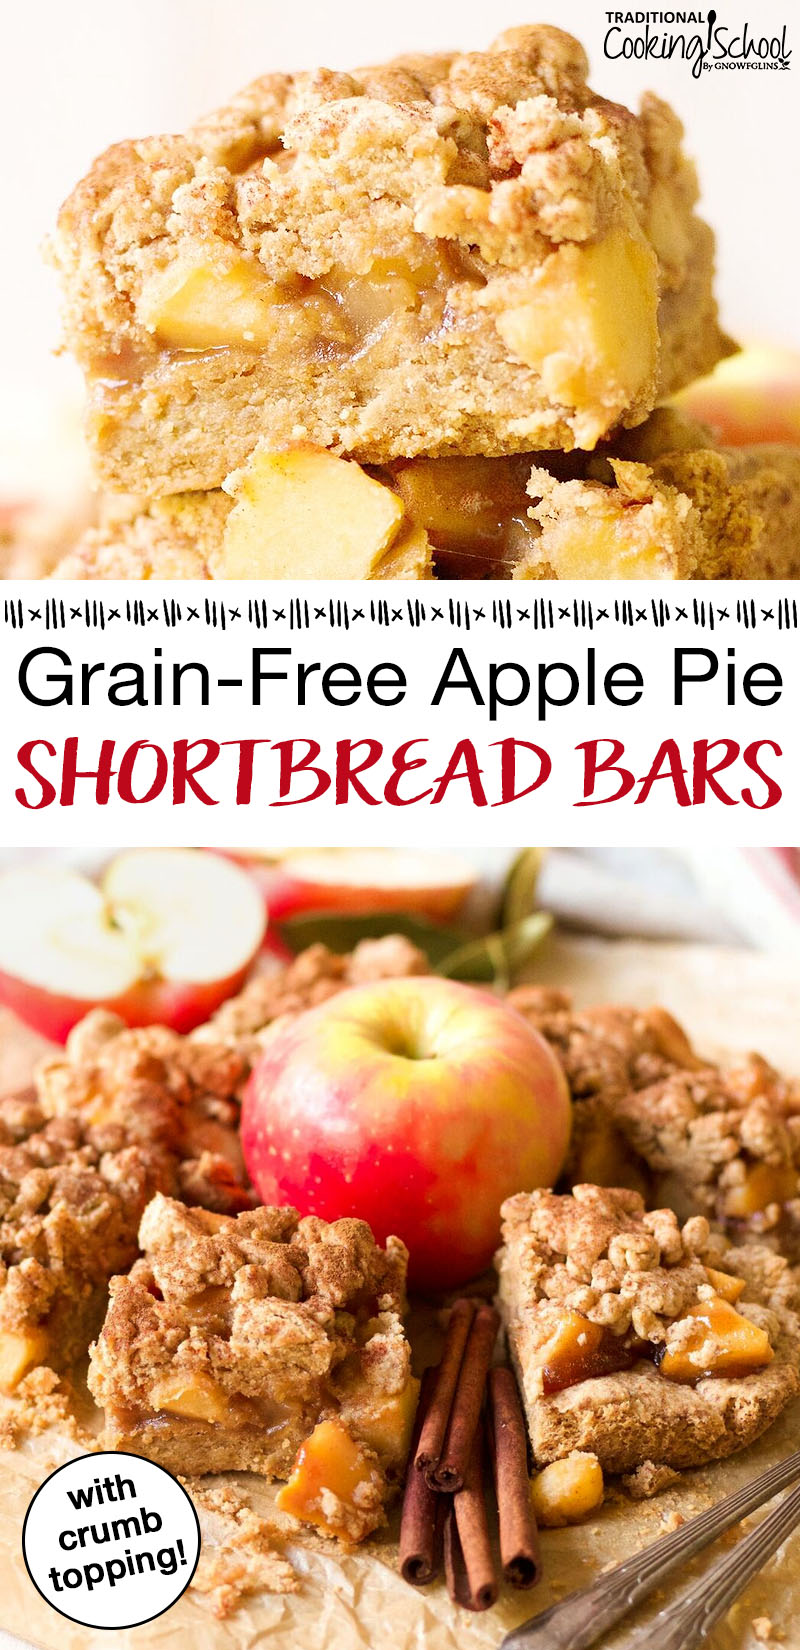 photo collage of apple pie shortbread bars with apples and cinnamon sticks with text overlay: "Grain-Free Apple Pie Shortbread Bars"